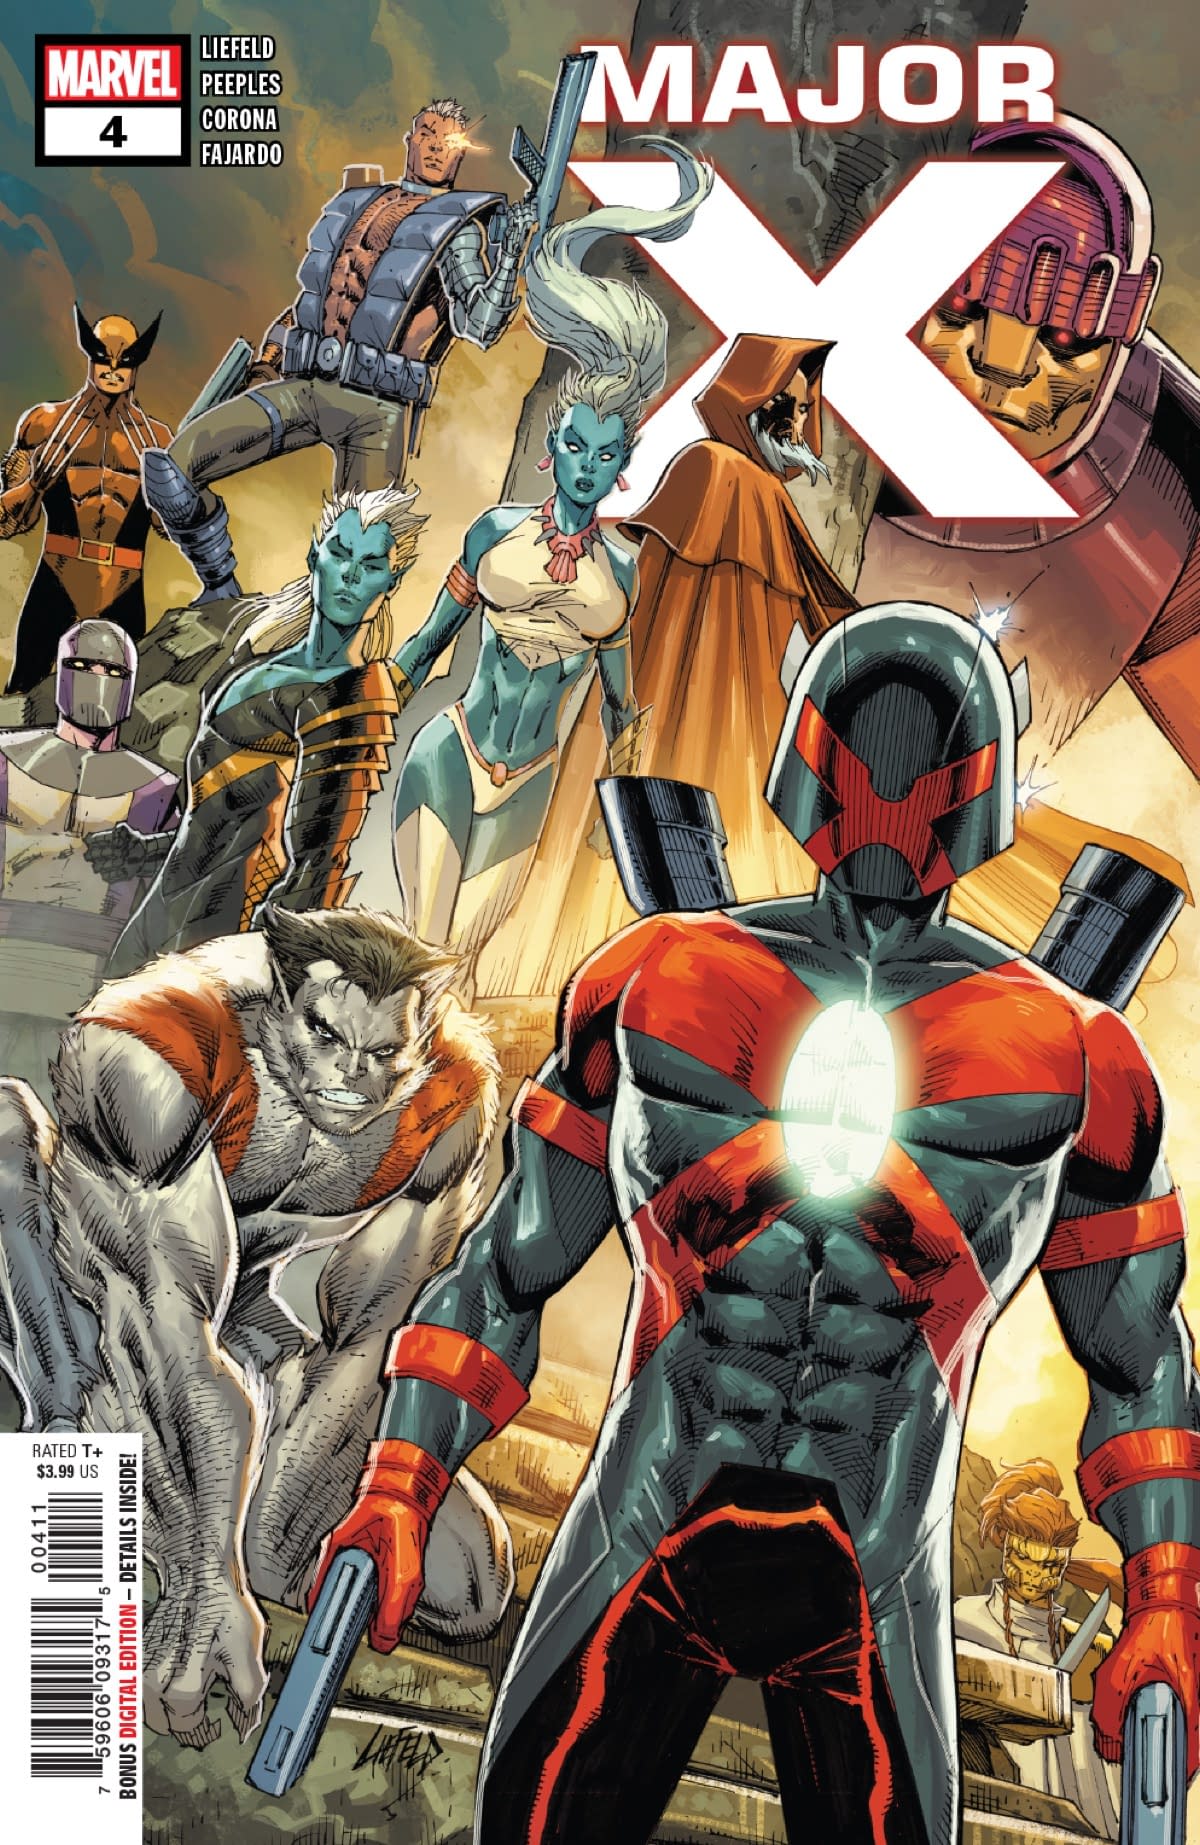 How Does The X-Ential Fare in the Democratic Primary? Major X #4 Preview